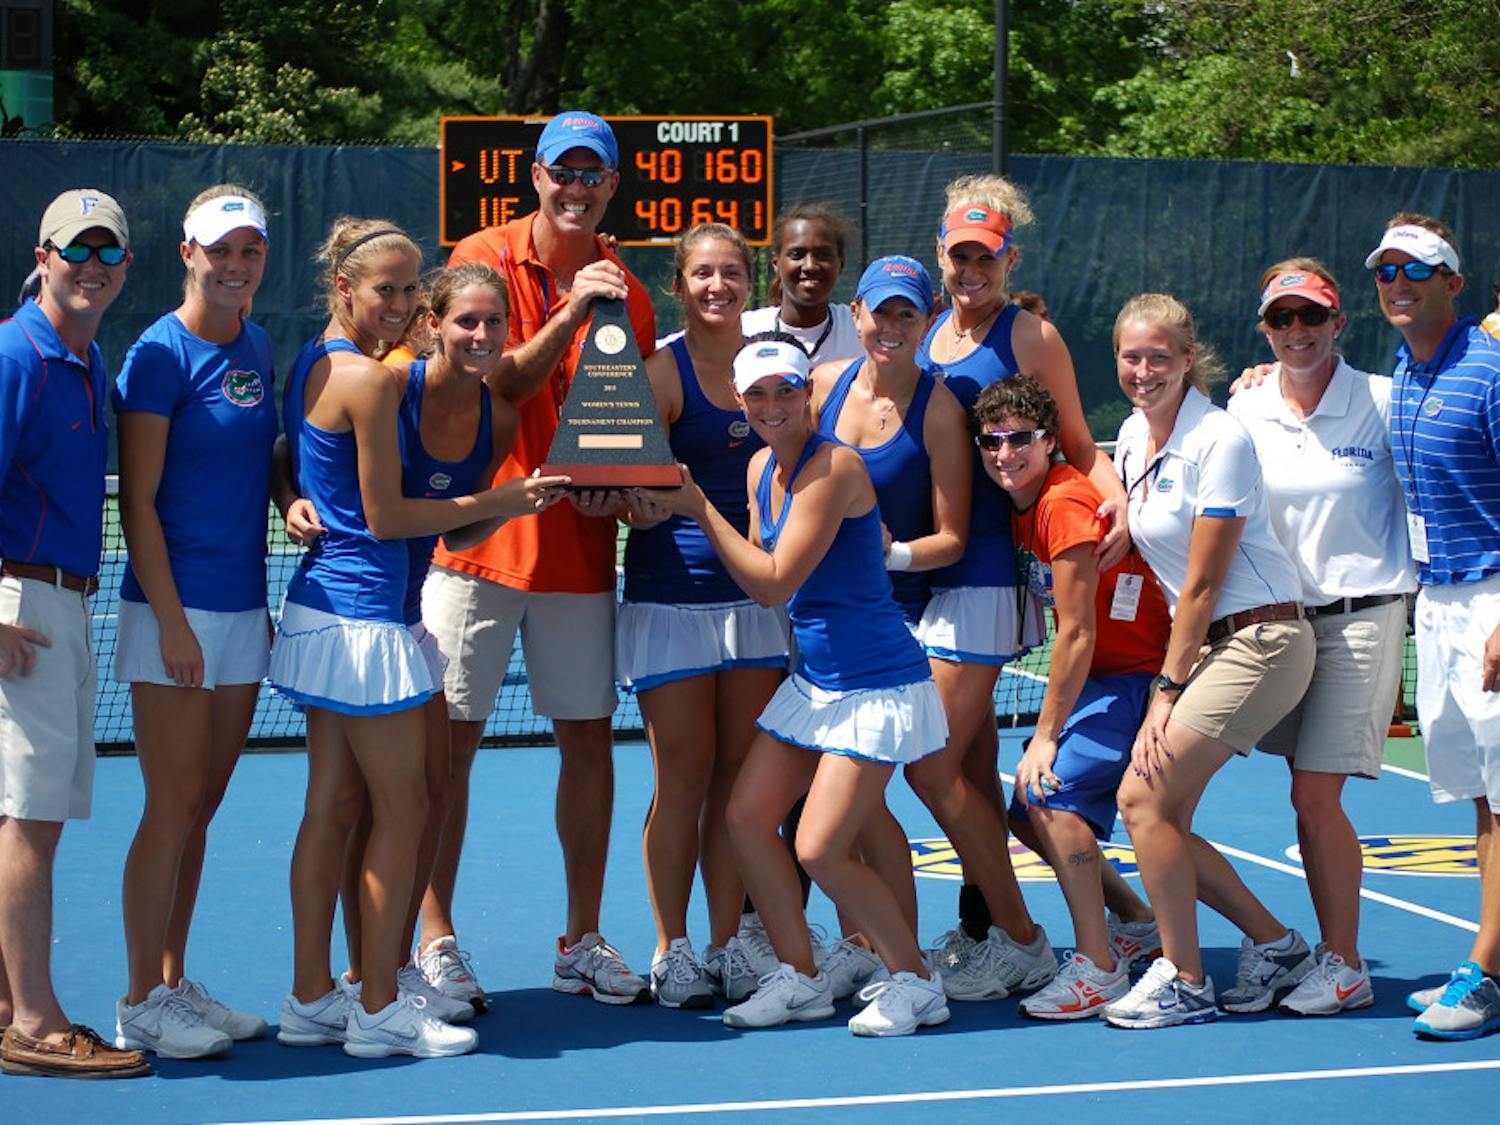 The No. 2 Gators women's tennis team captured the 2011 SEC Championship on Sunday with a 4-0 shutout over tournament host Tennessee.